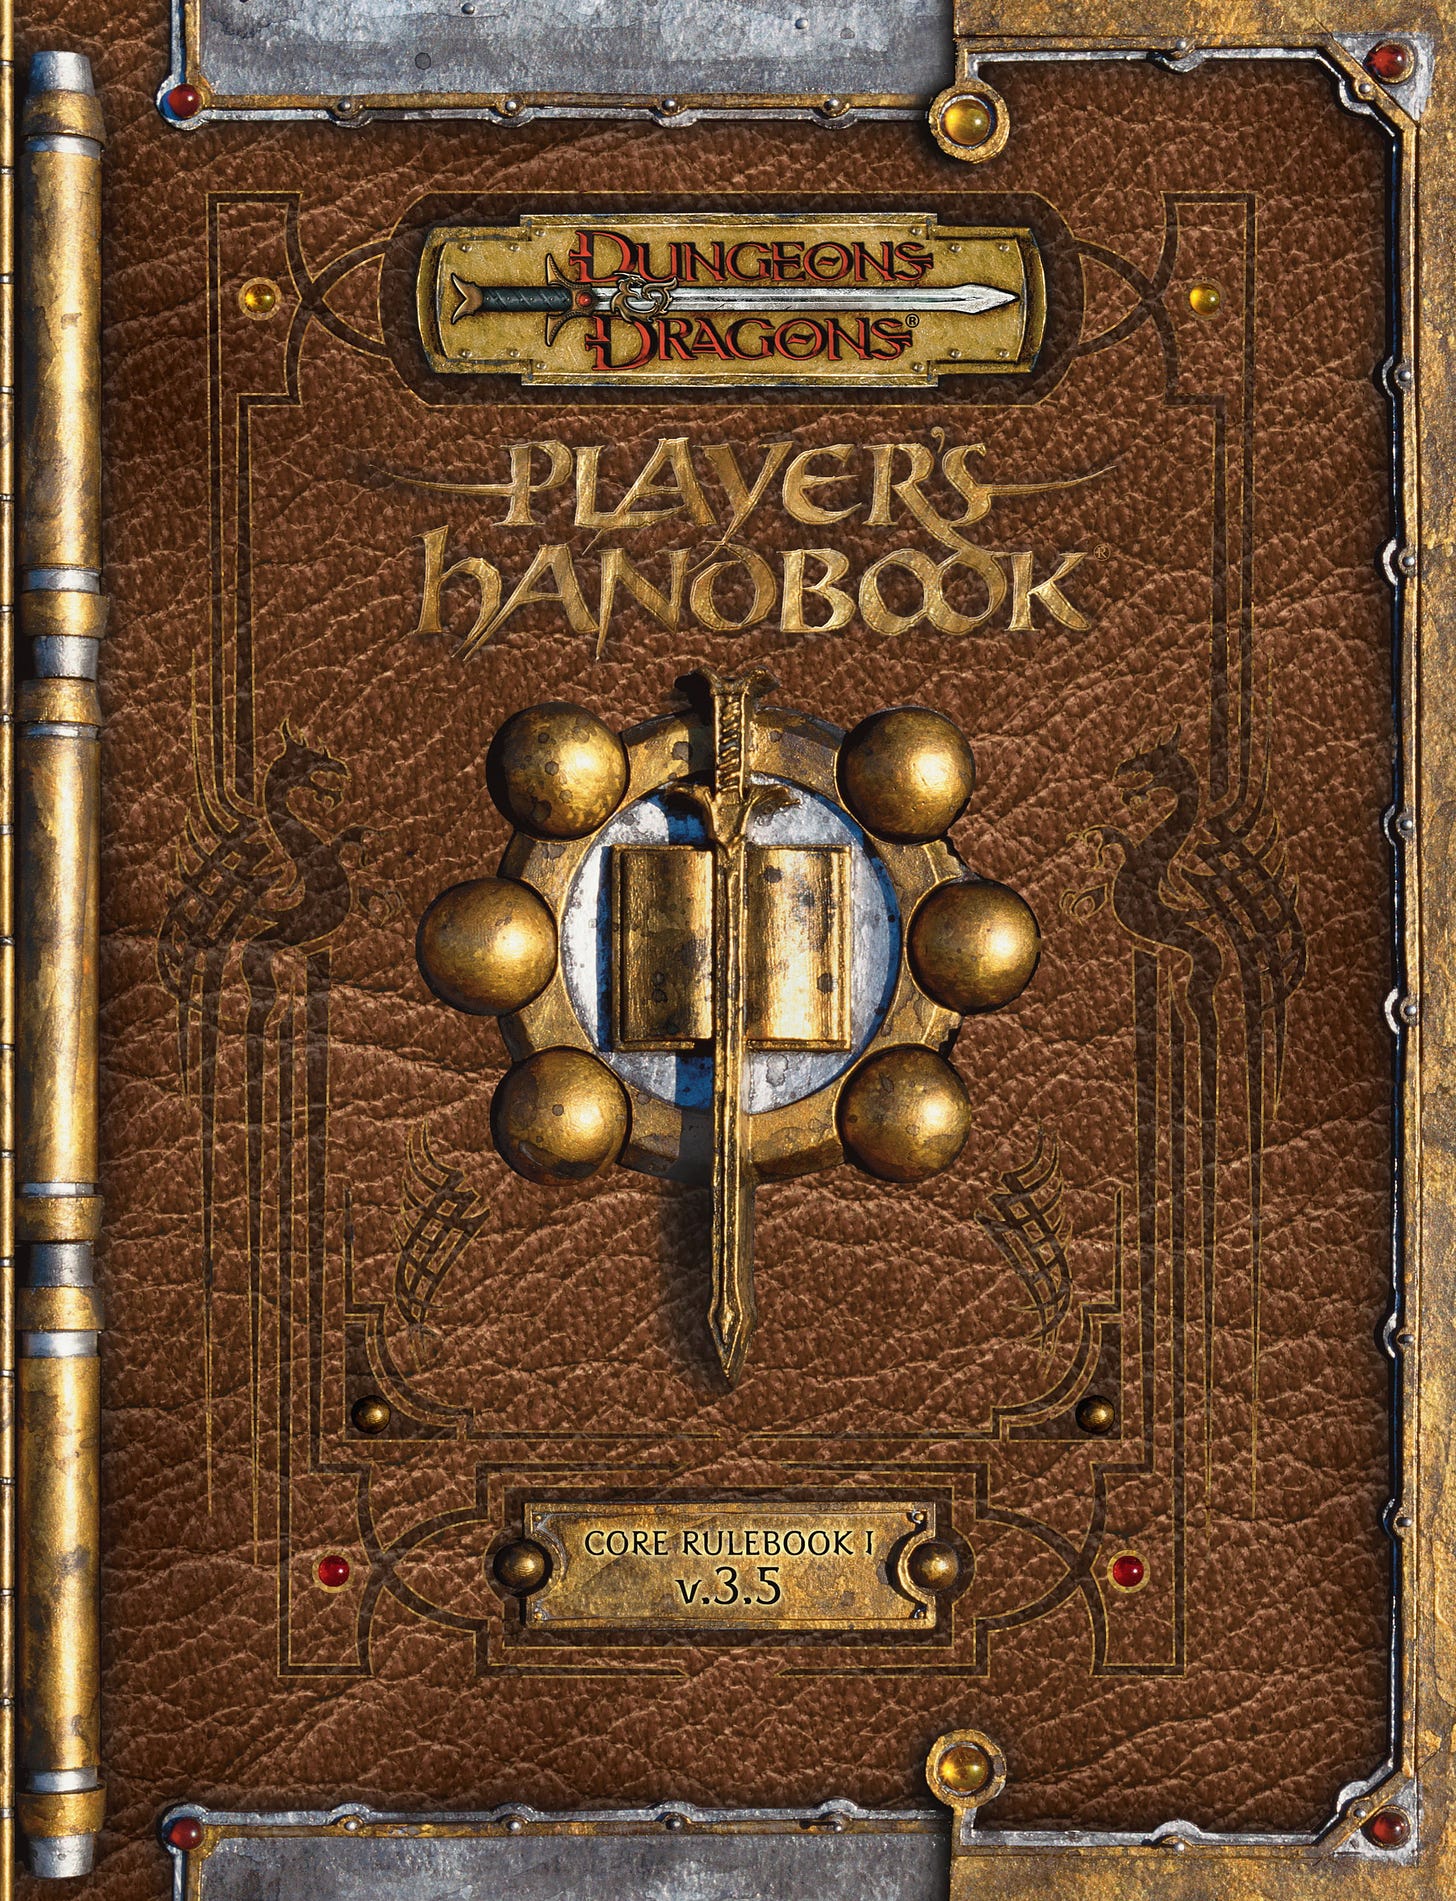 A cover of a book designed to appear old and of wrinkled brown leather. It reads "Dungeons & Dragons: Player's Handbook" and lower down "Core Rulebook v 3.5." The center has a gold emblem of a sword running down the middle of an open book, within a circle.